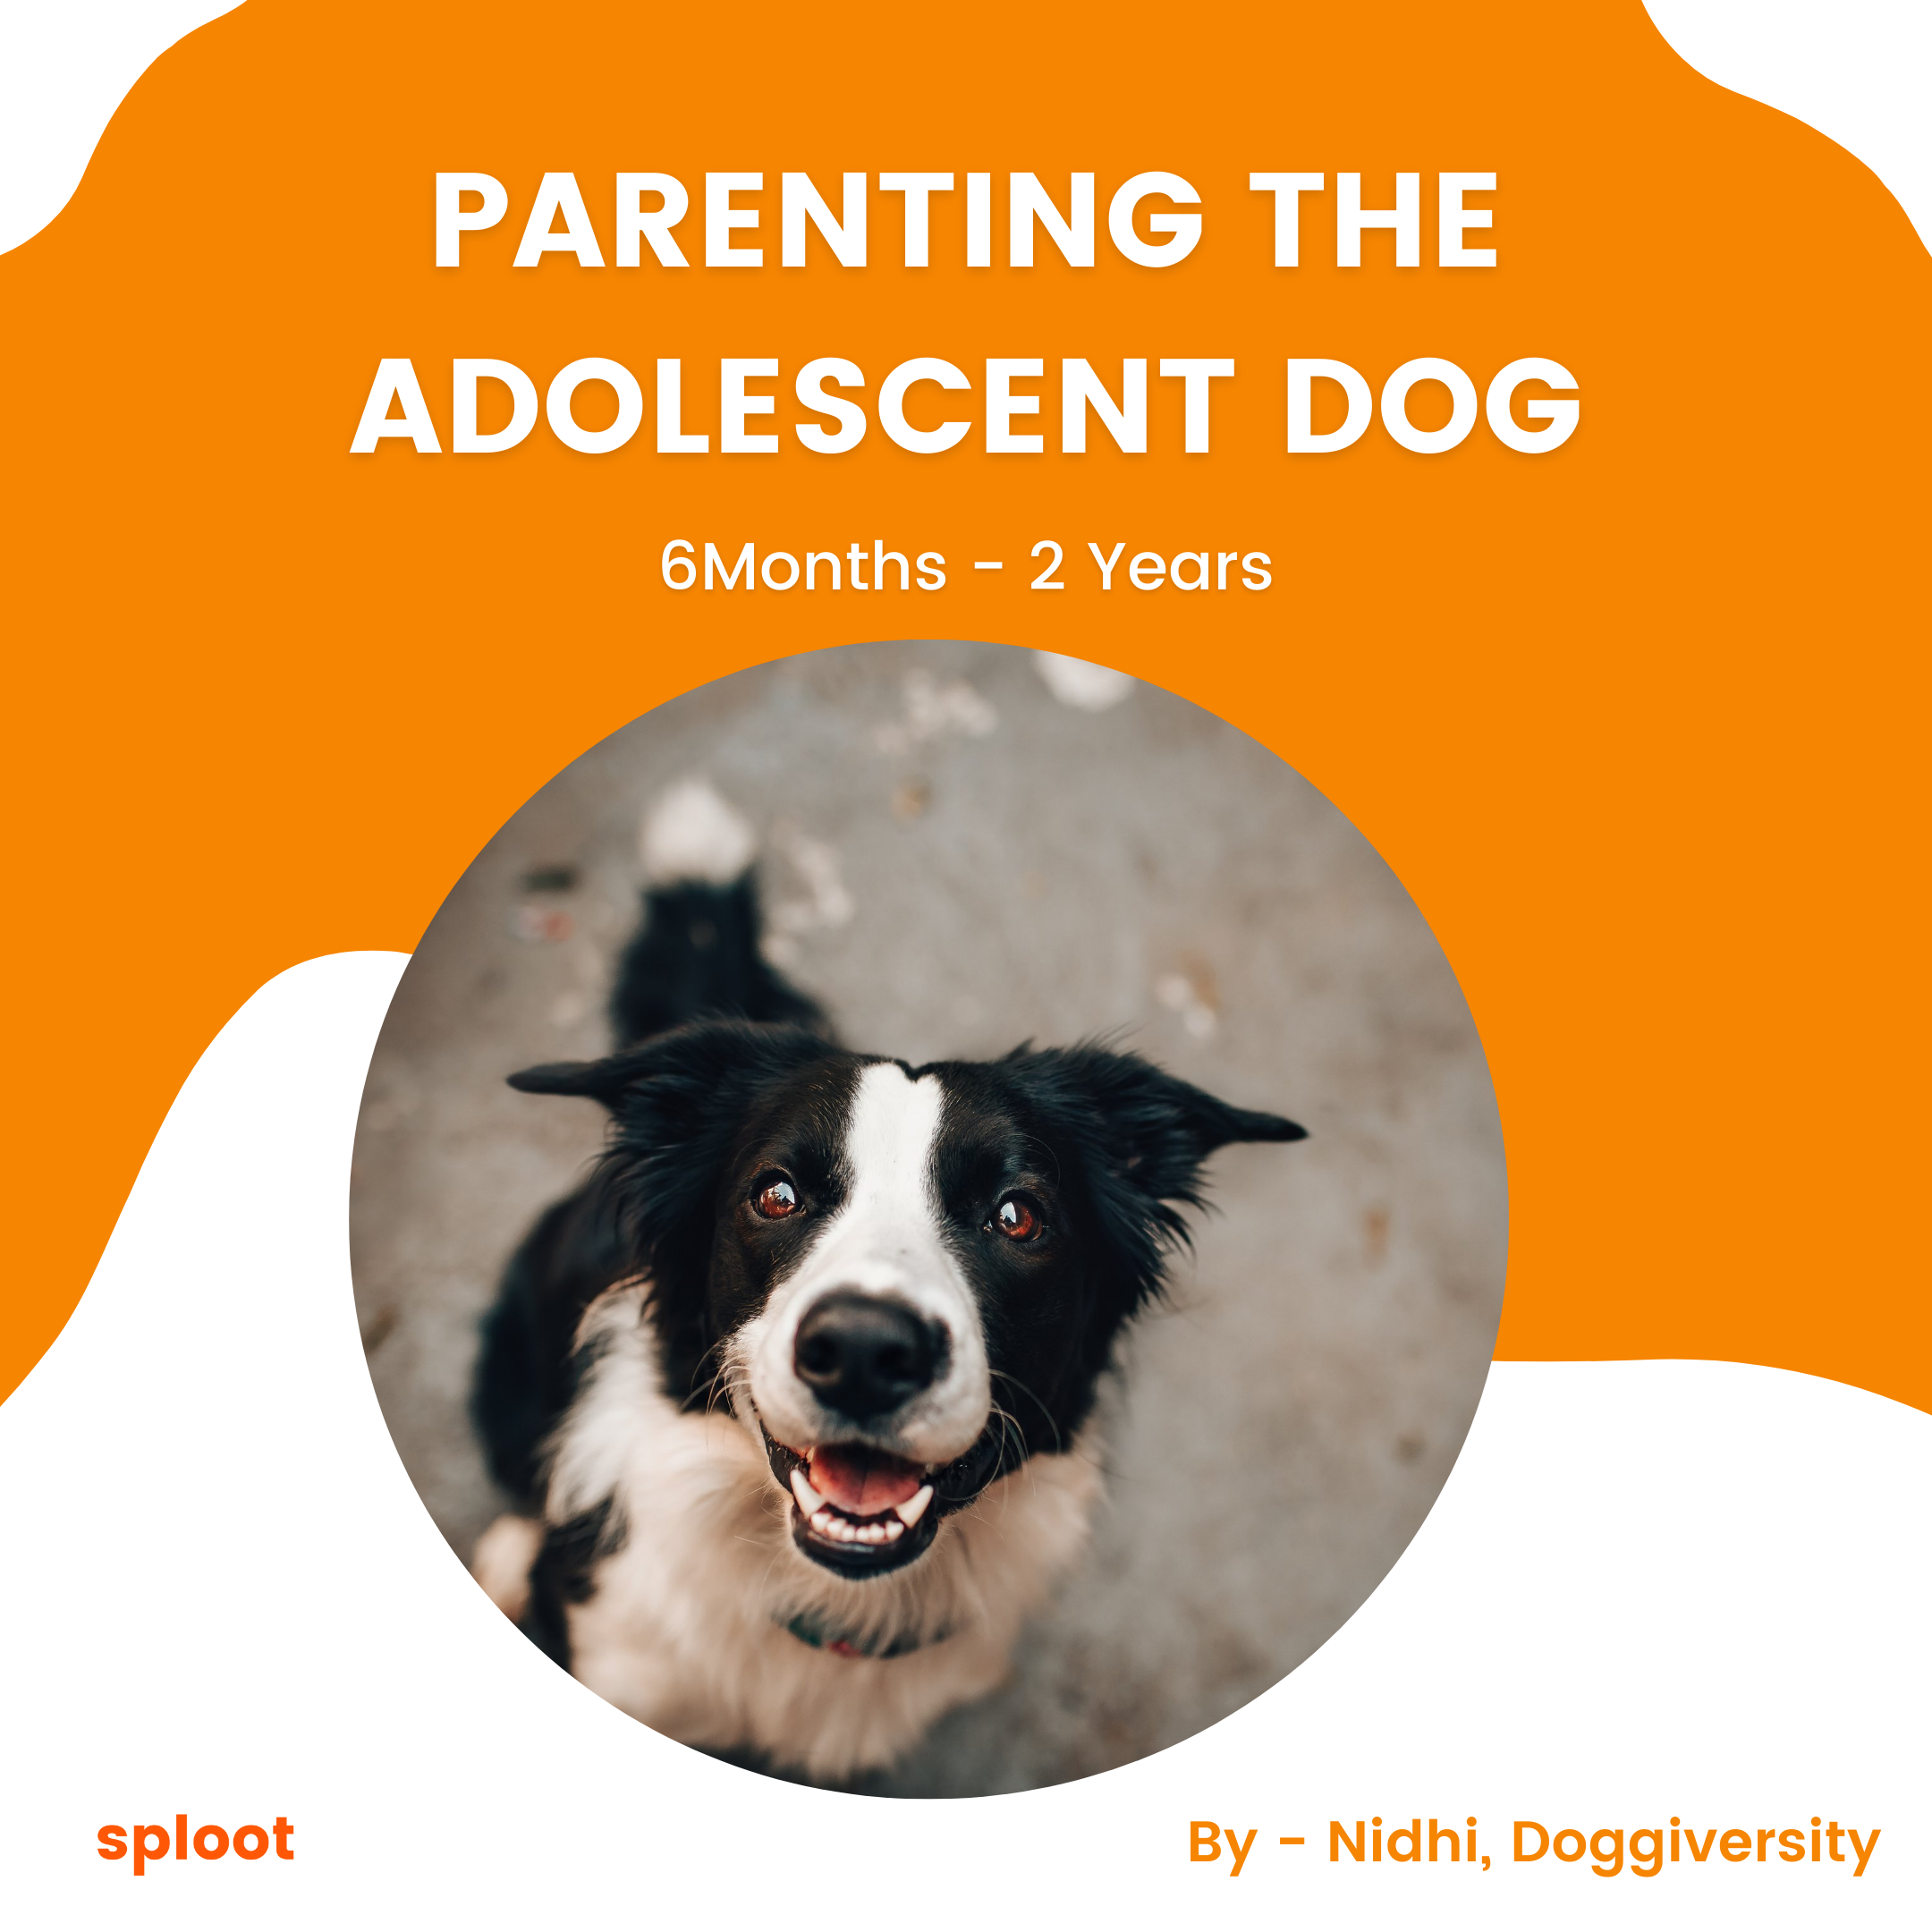 Parenting The Adolescent Dog (6Months-2Years)